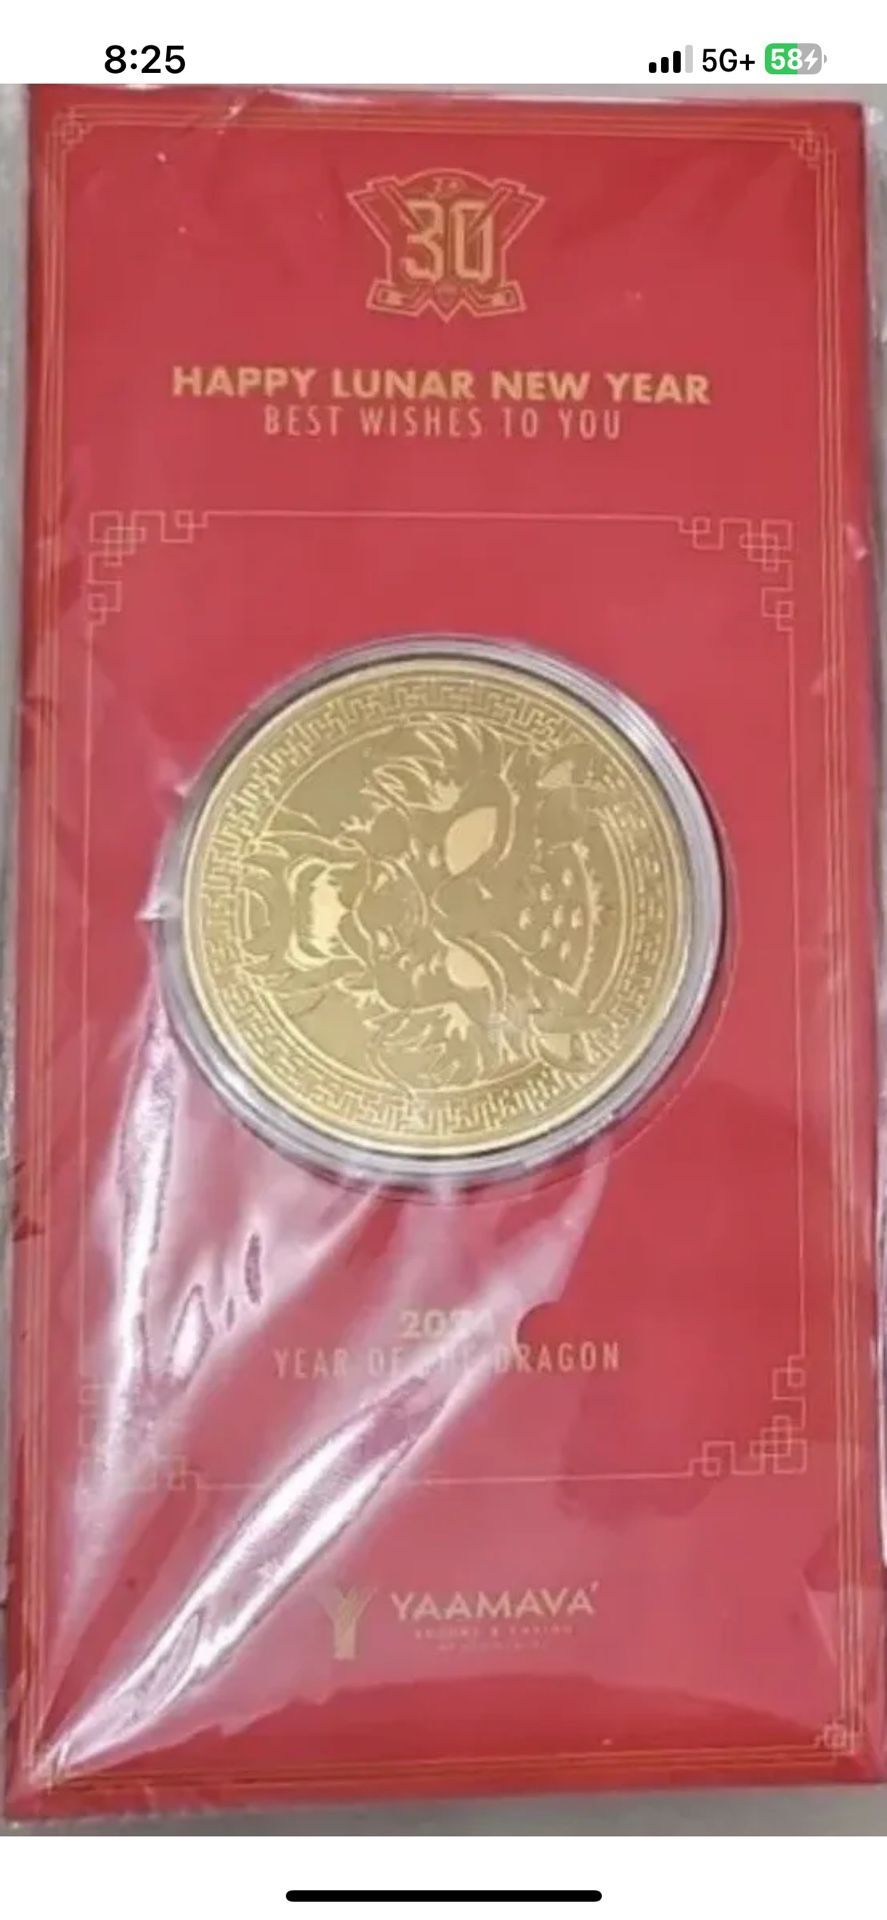 Anaheim Ducks Lunar Chinese New Year Commemorative Year of The Dragon Coin